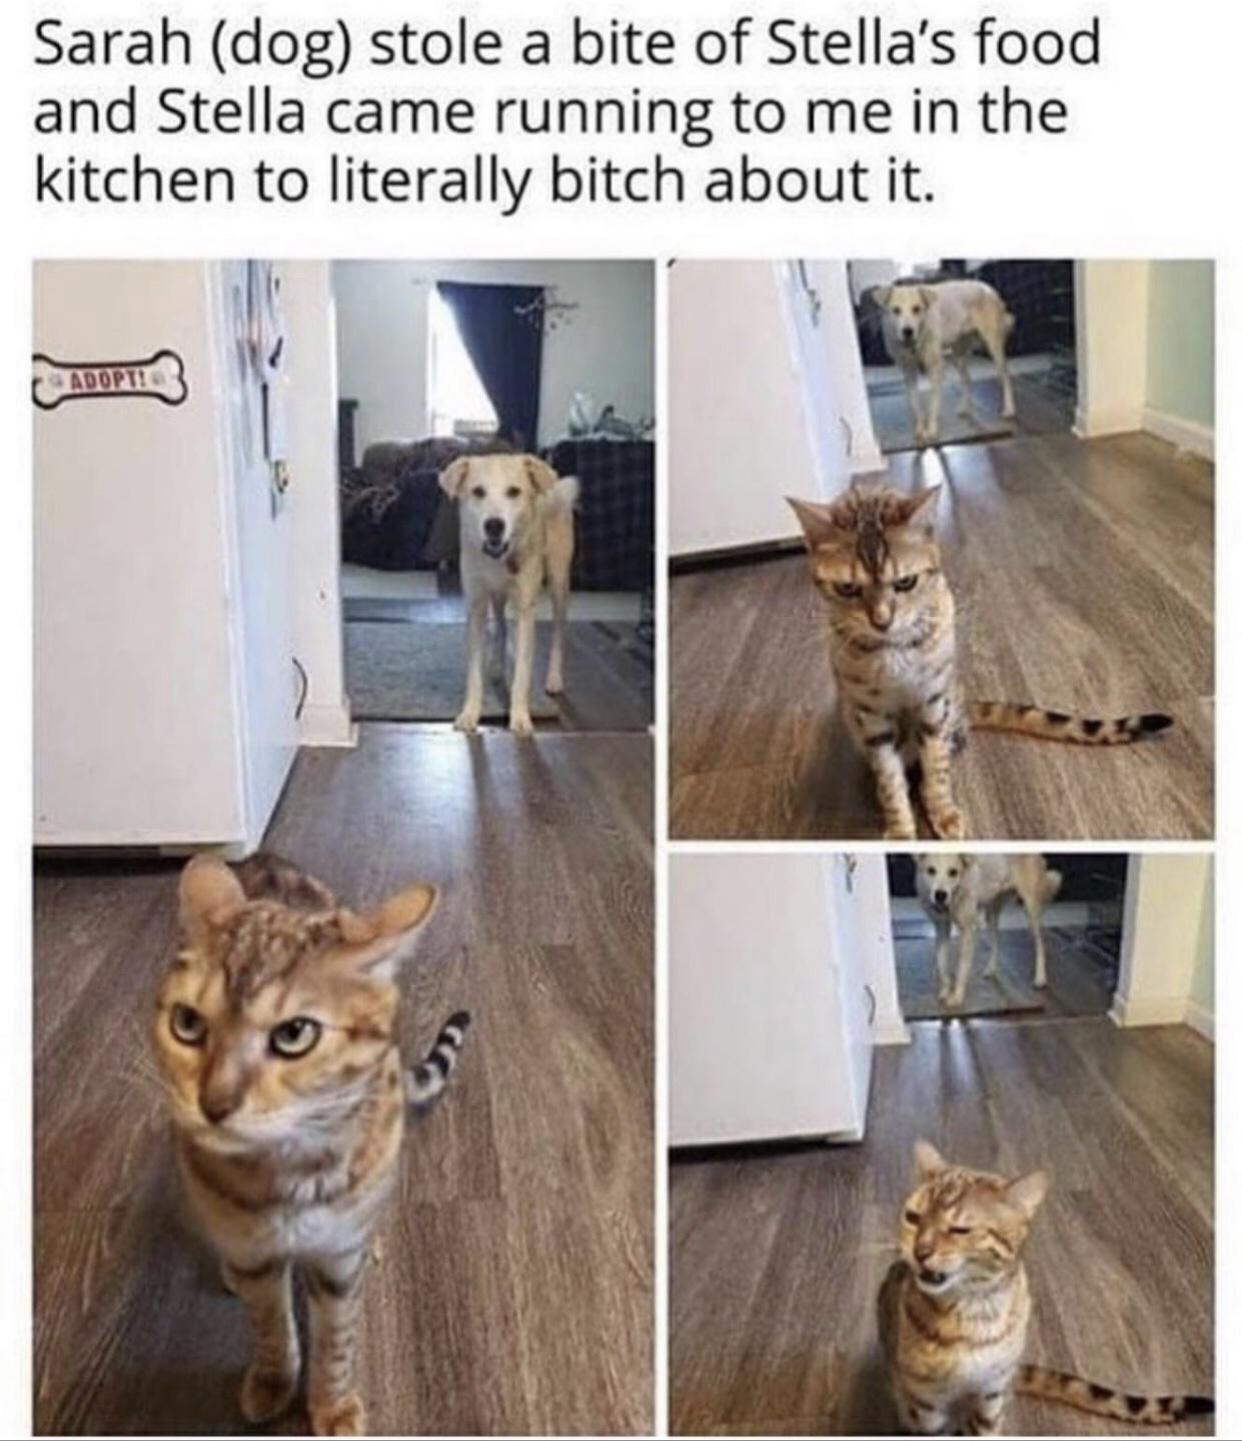 dank memes - Cat - Sarah dog stole a bite of Stella's food and Stella came running to me in the kitchen to literally bitch about it. Adopt!